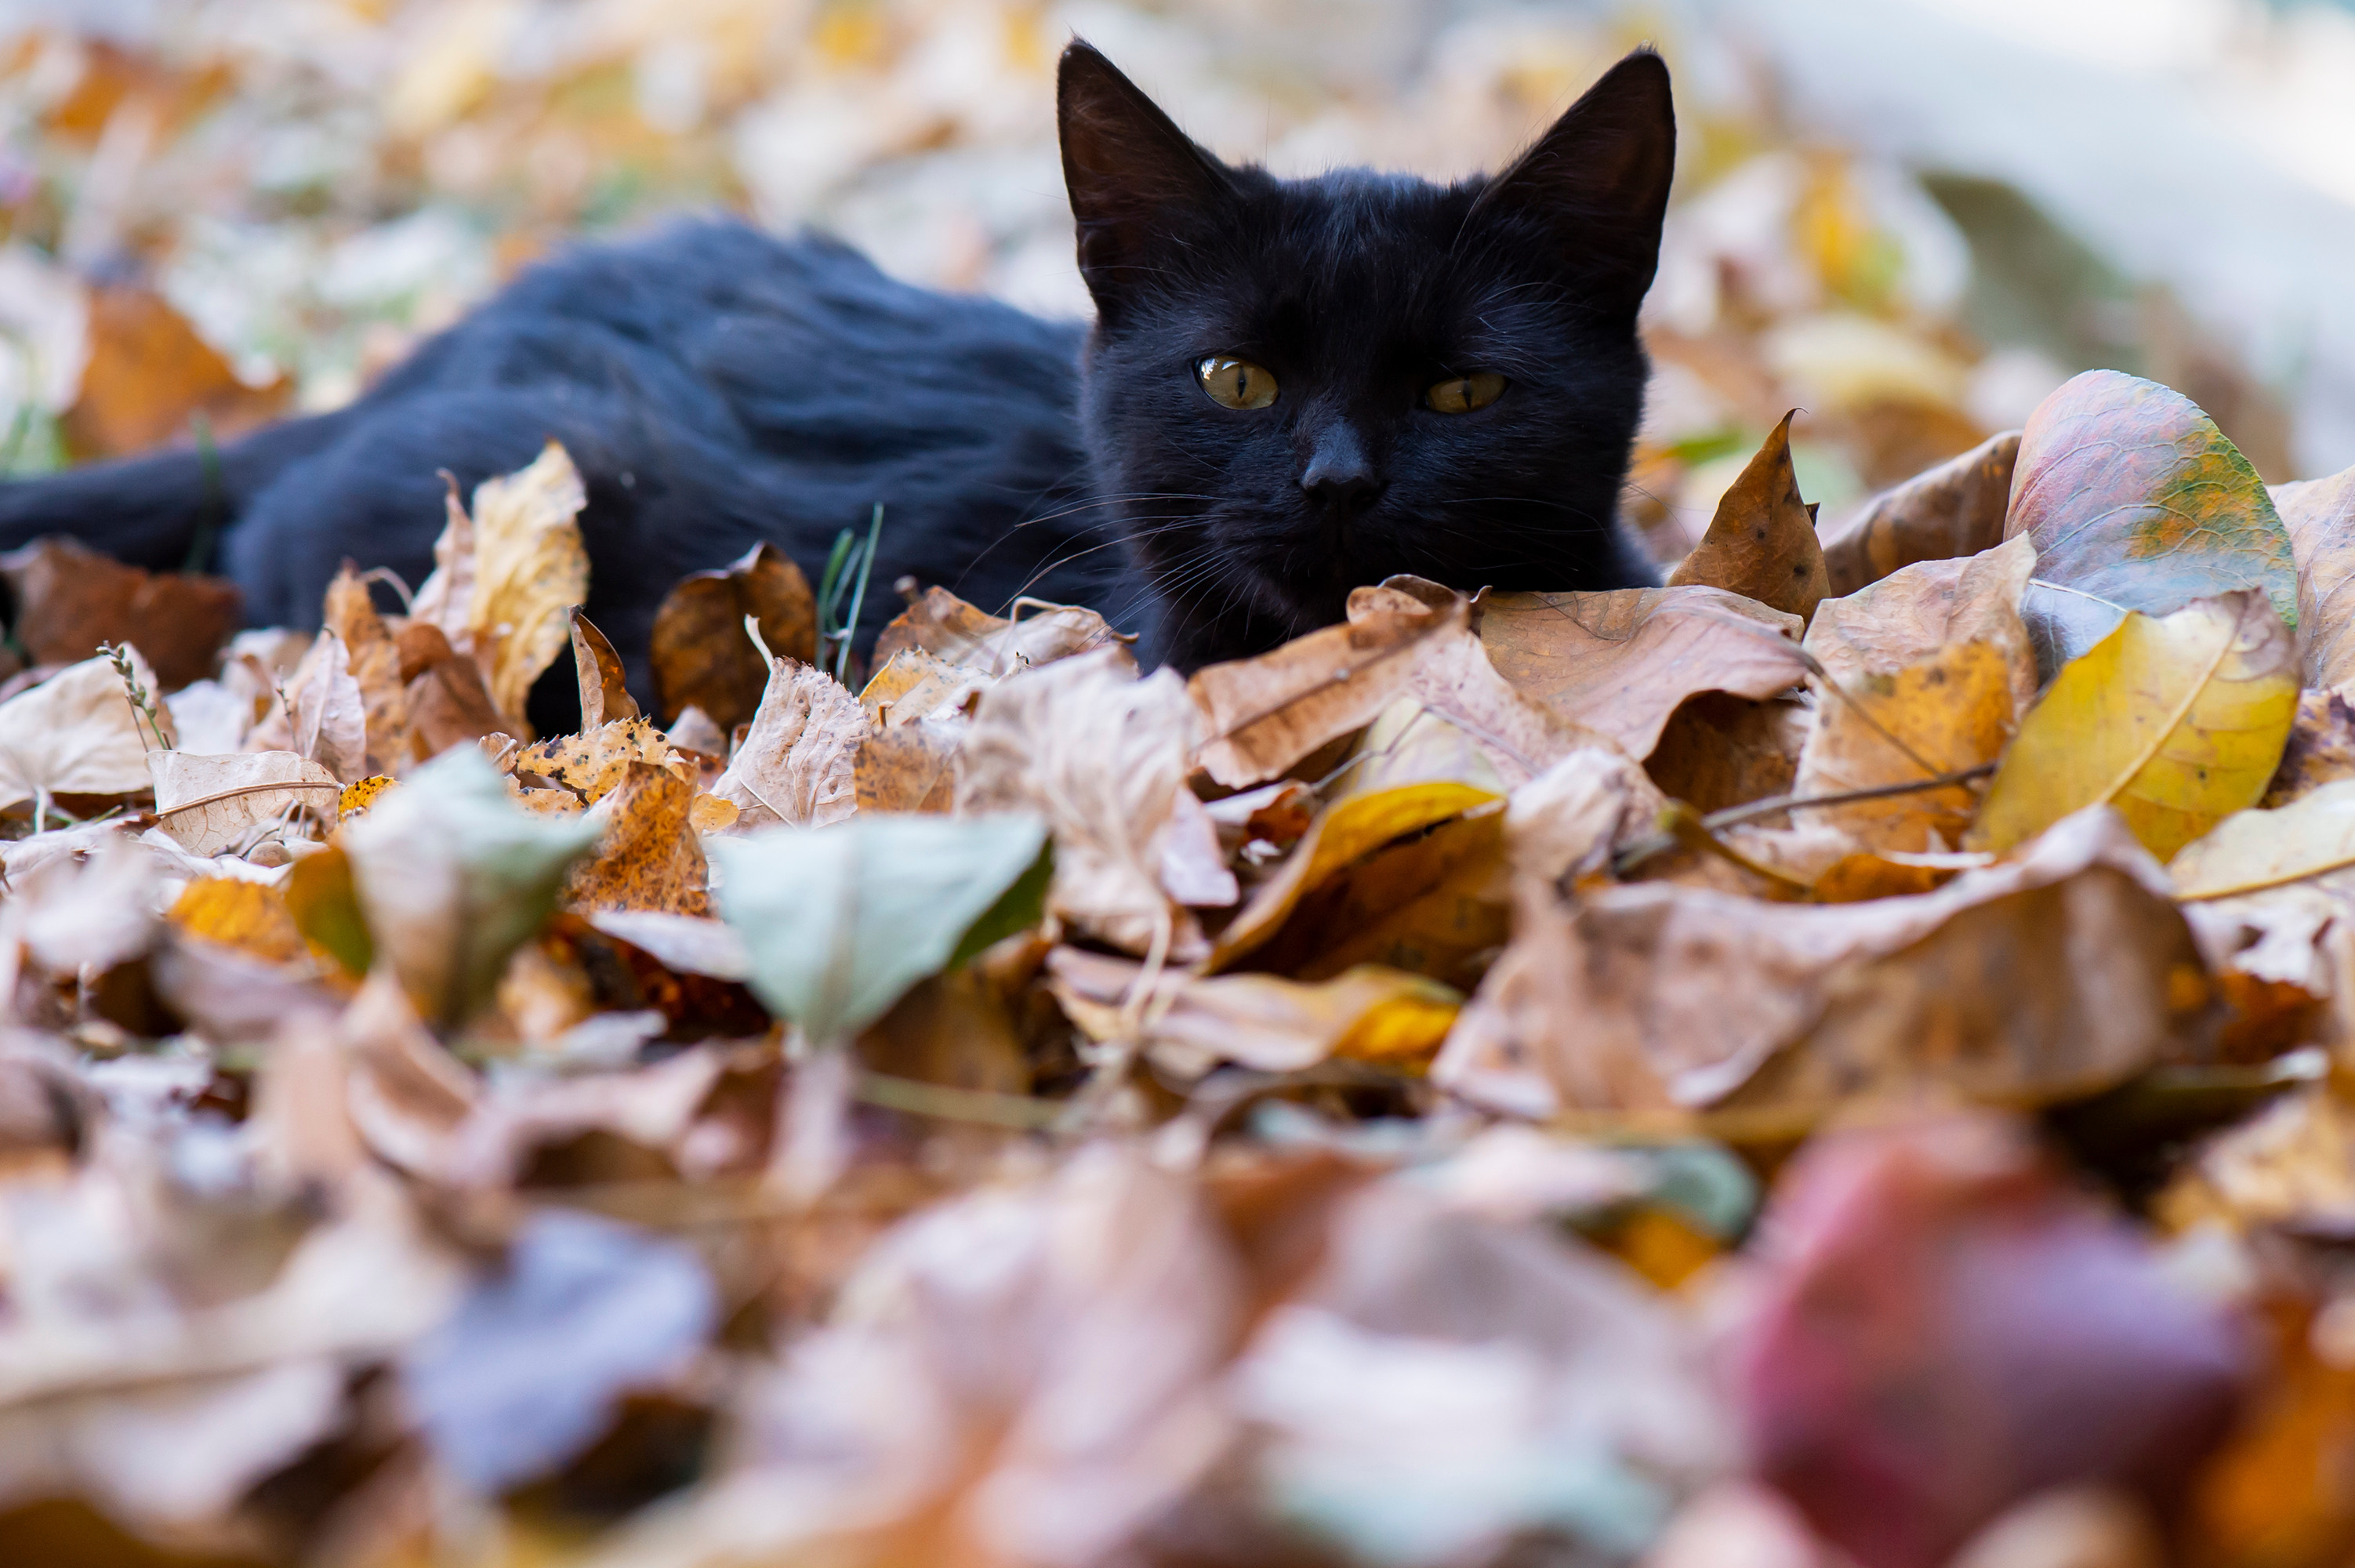 A black cat with yellow eyes in the leaves in the yard. Autumn has arrived.